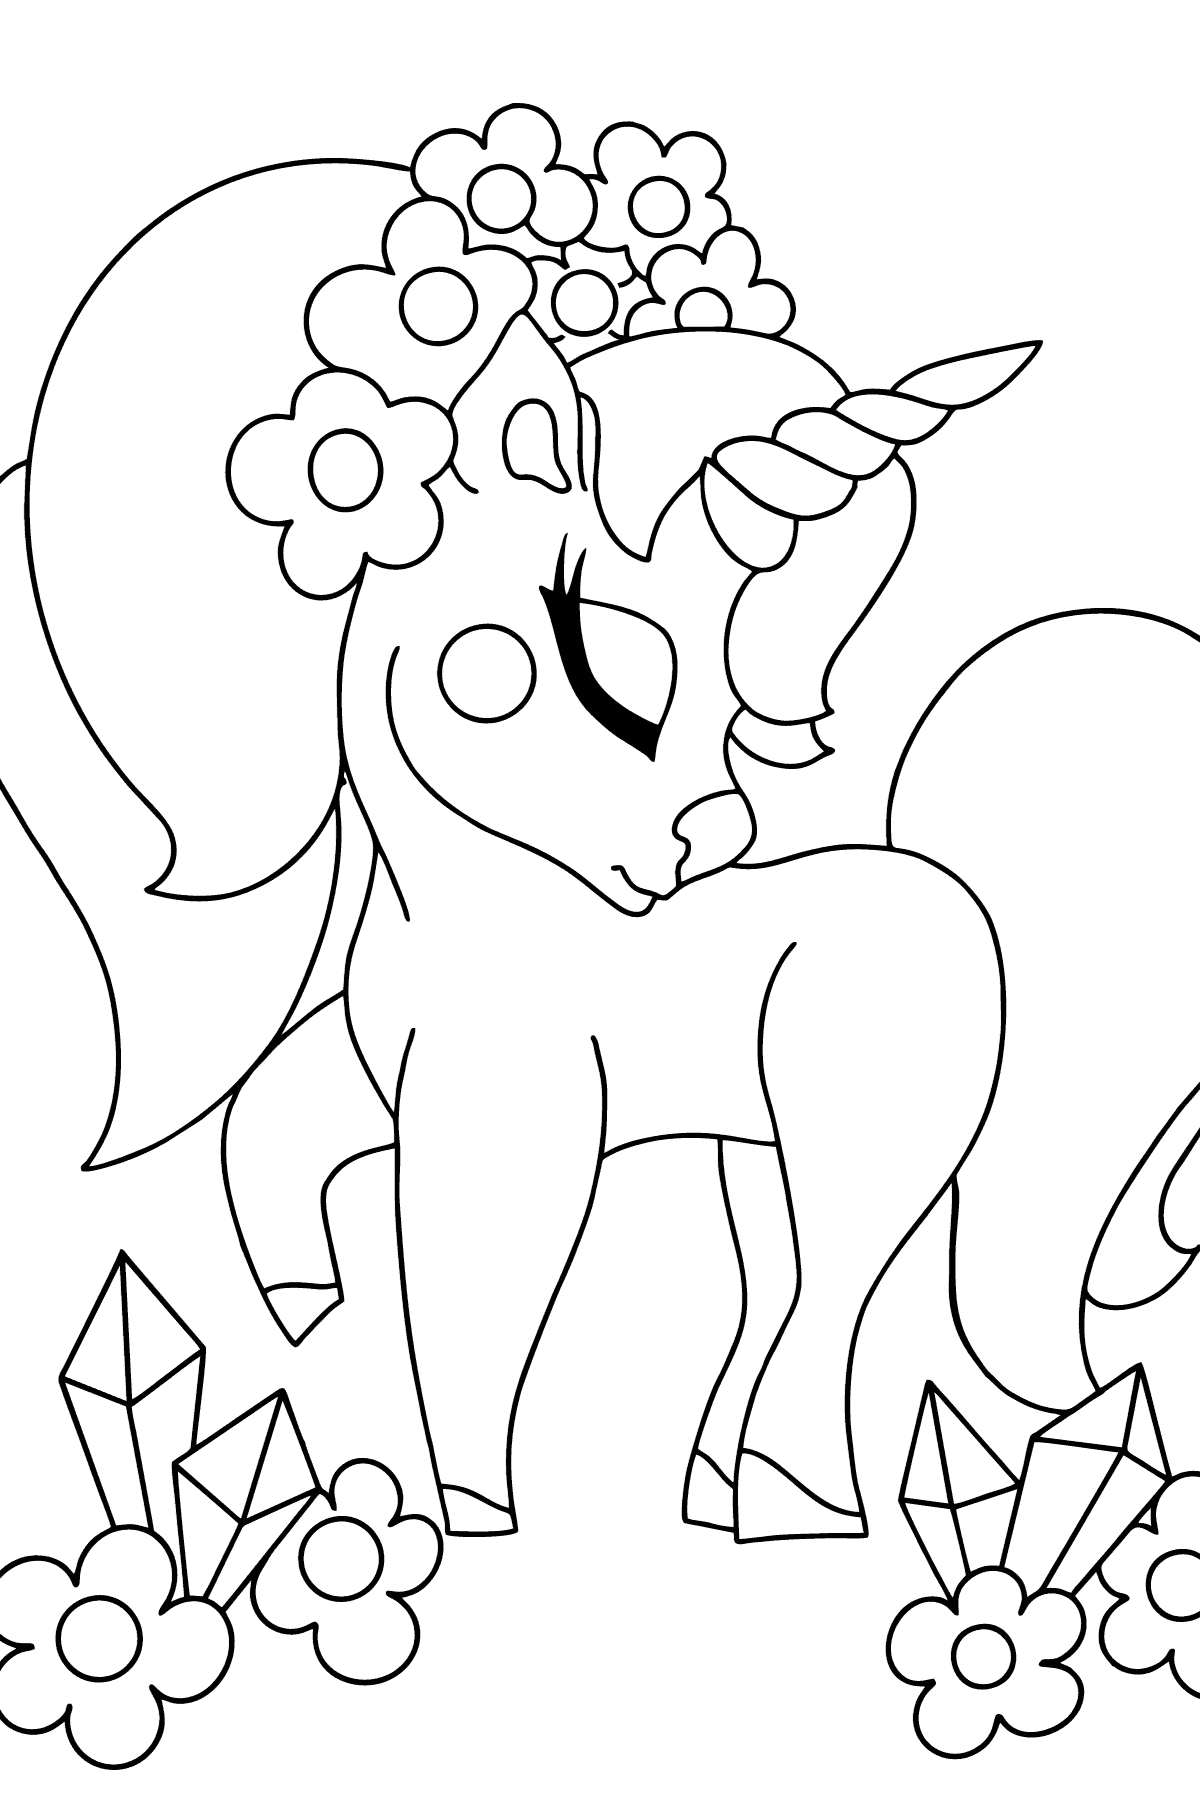 Simple Unicorn Coloring Book for Kids - Coloring Pages for Kids